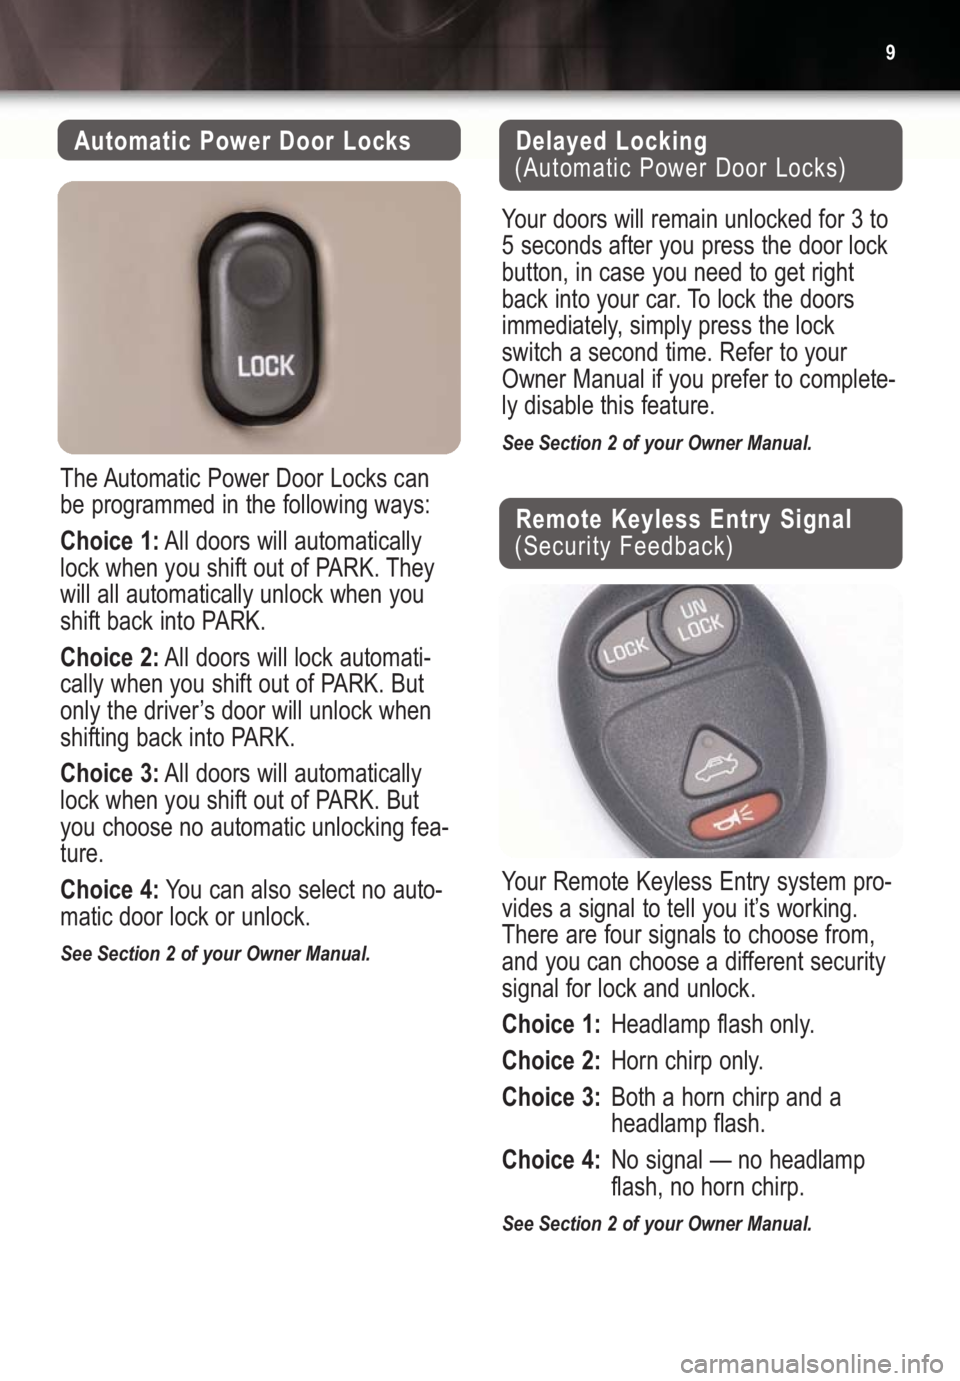 BUICK CENTURY 2004  Get To Know Guide 9
Automatic Power Door Locks
The Automatic Power Door Locks can
be programmed in the following ways:
Choice 1:All doors will automatically
lock when you shift out of PARK. They
will all automatically 